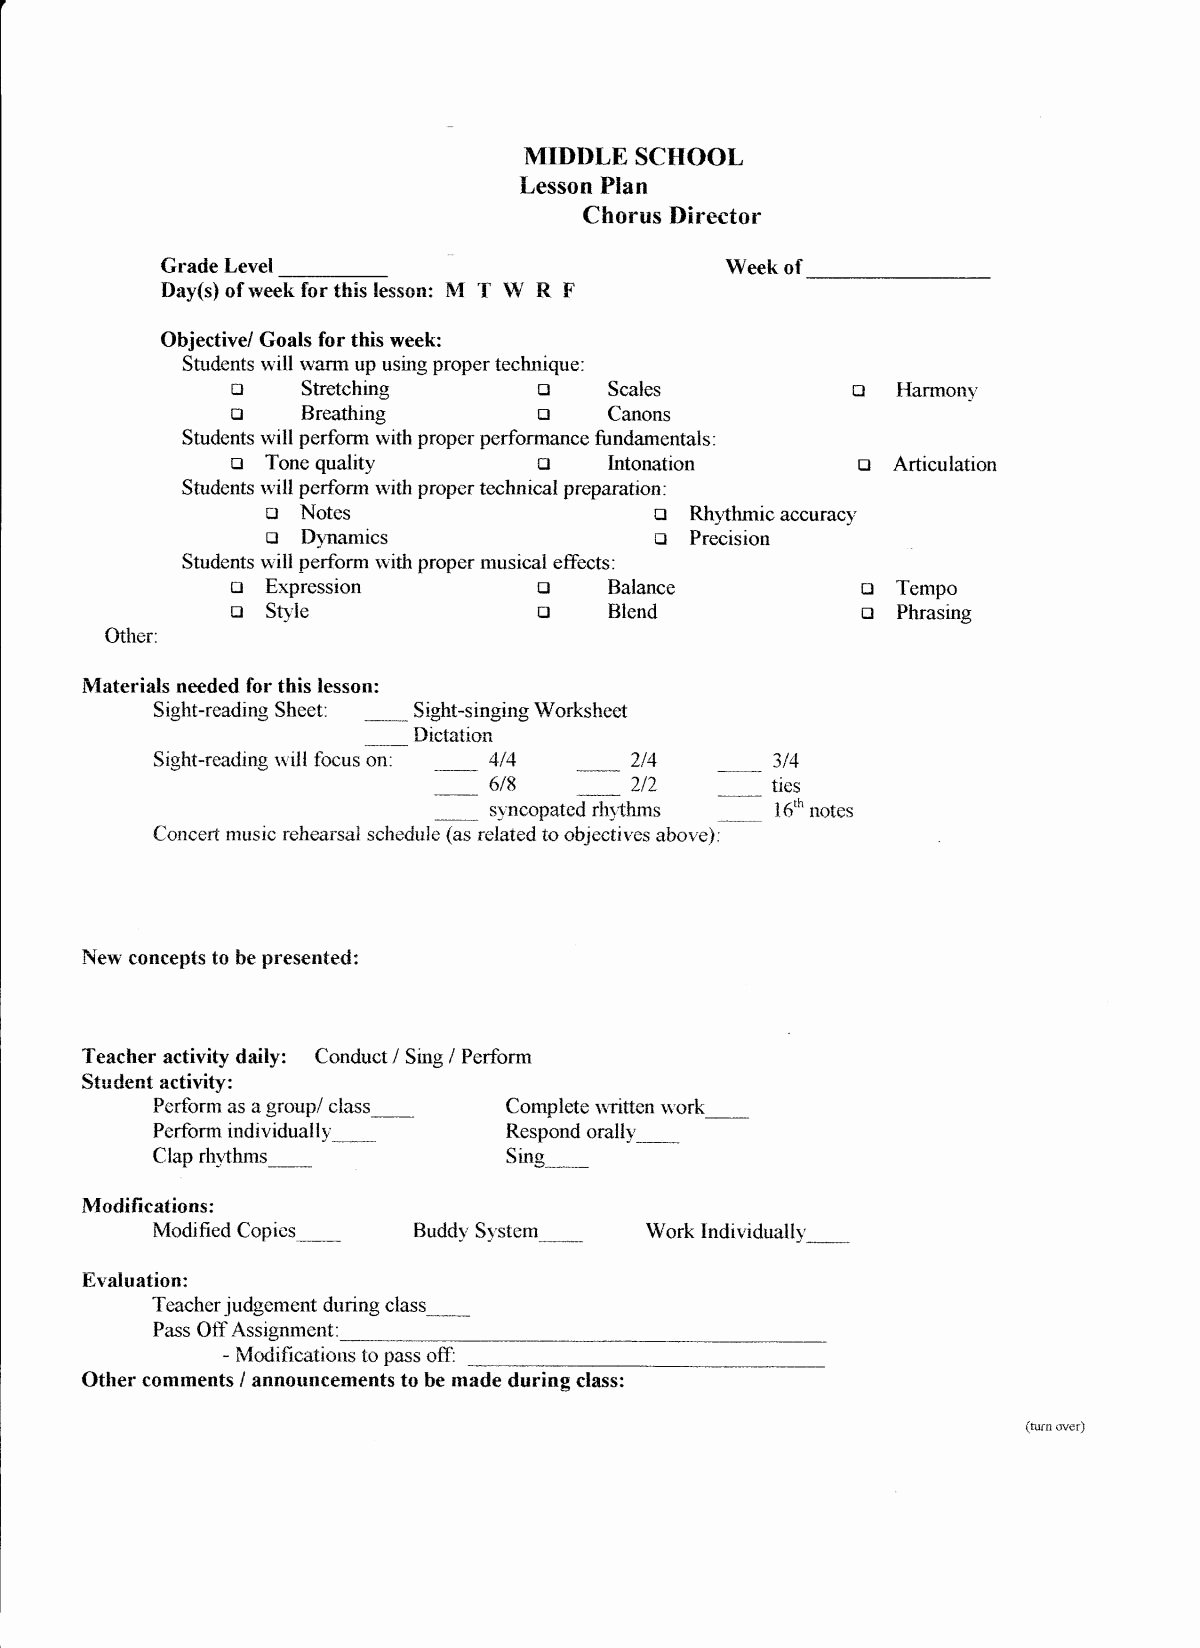 Middle School Lesson Plan Template Awesome Lesson Plan Template – Middle School Chorus